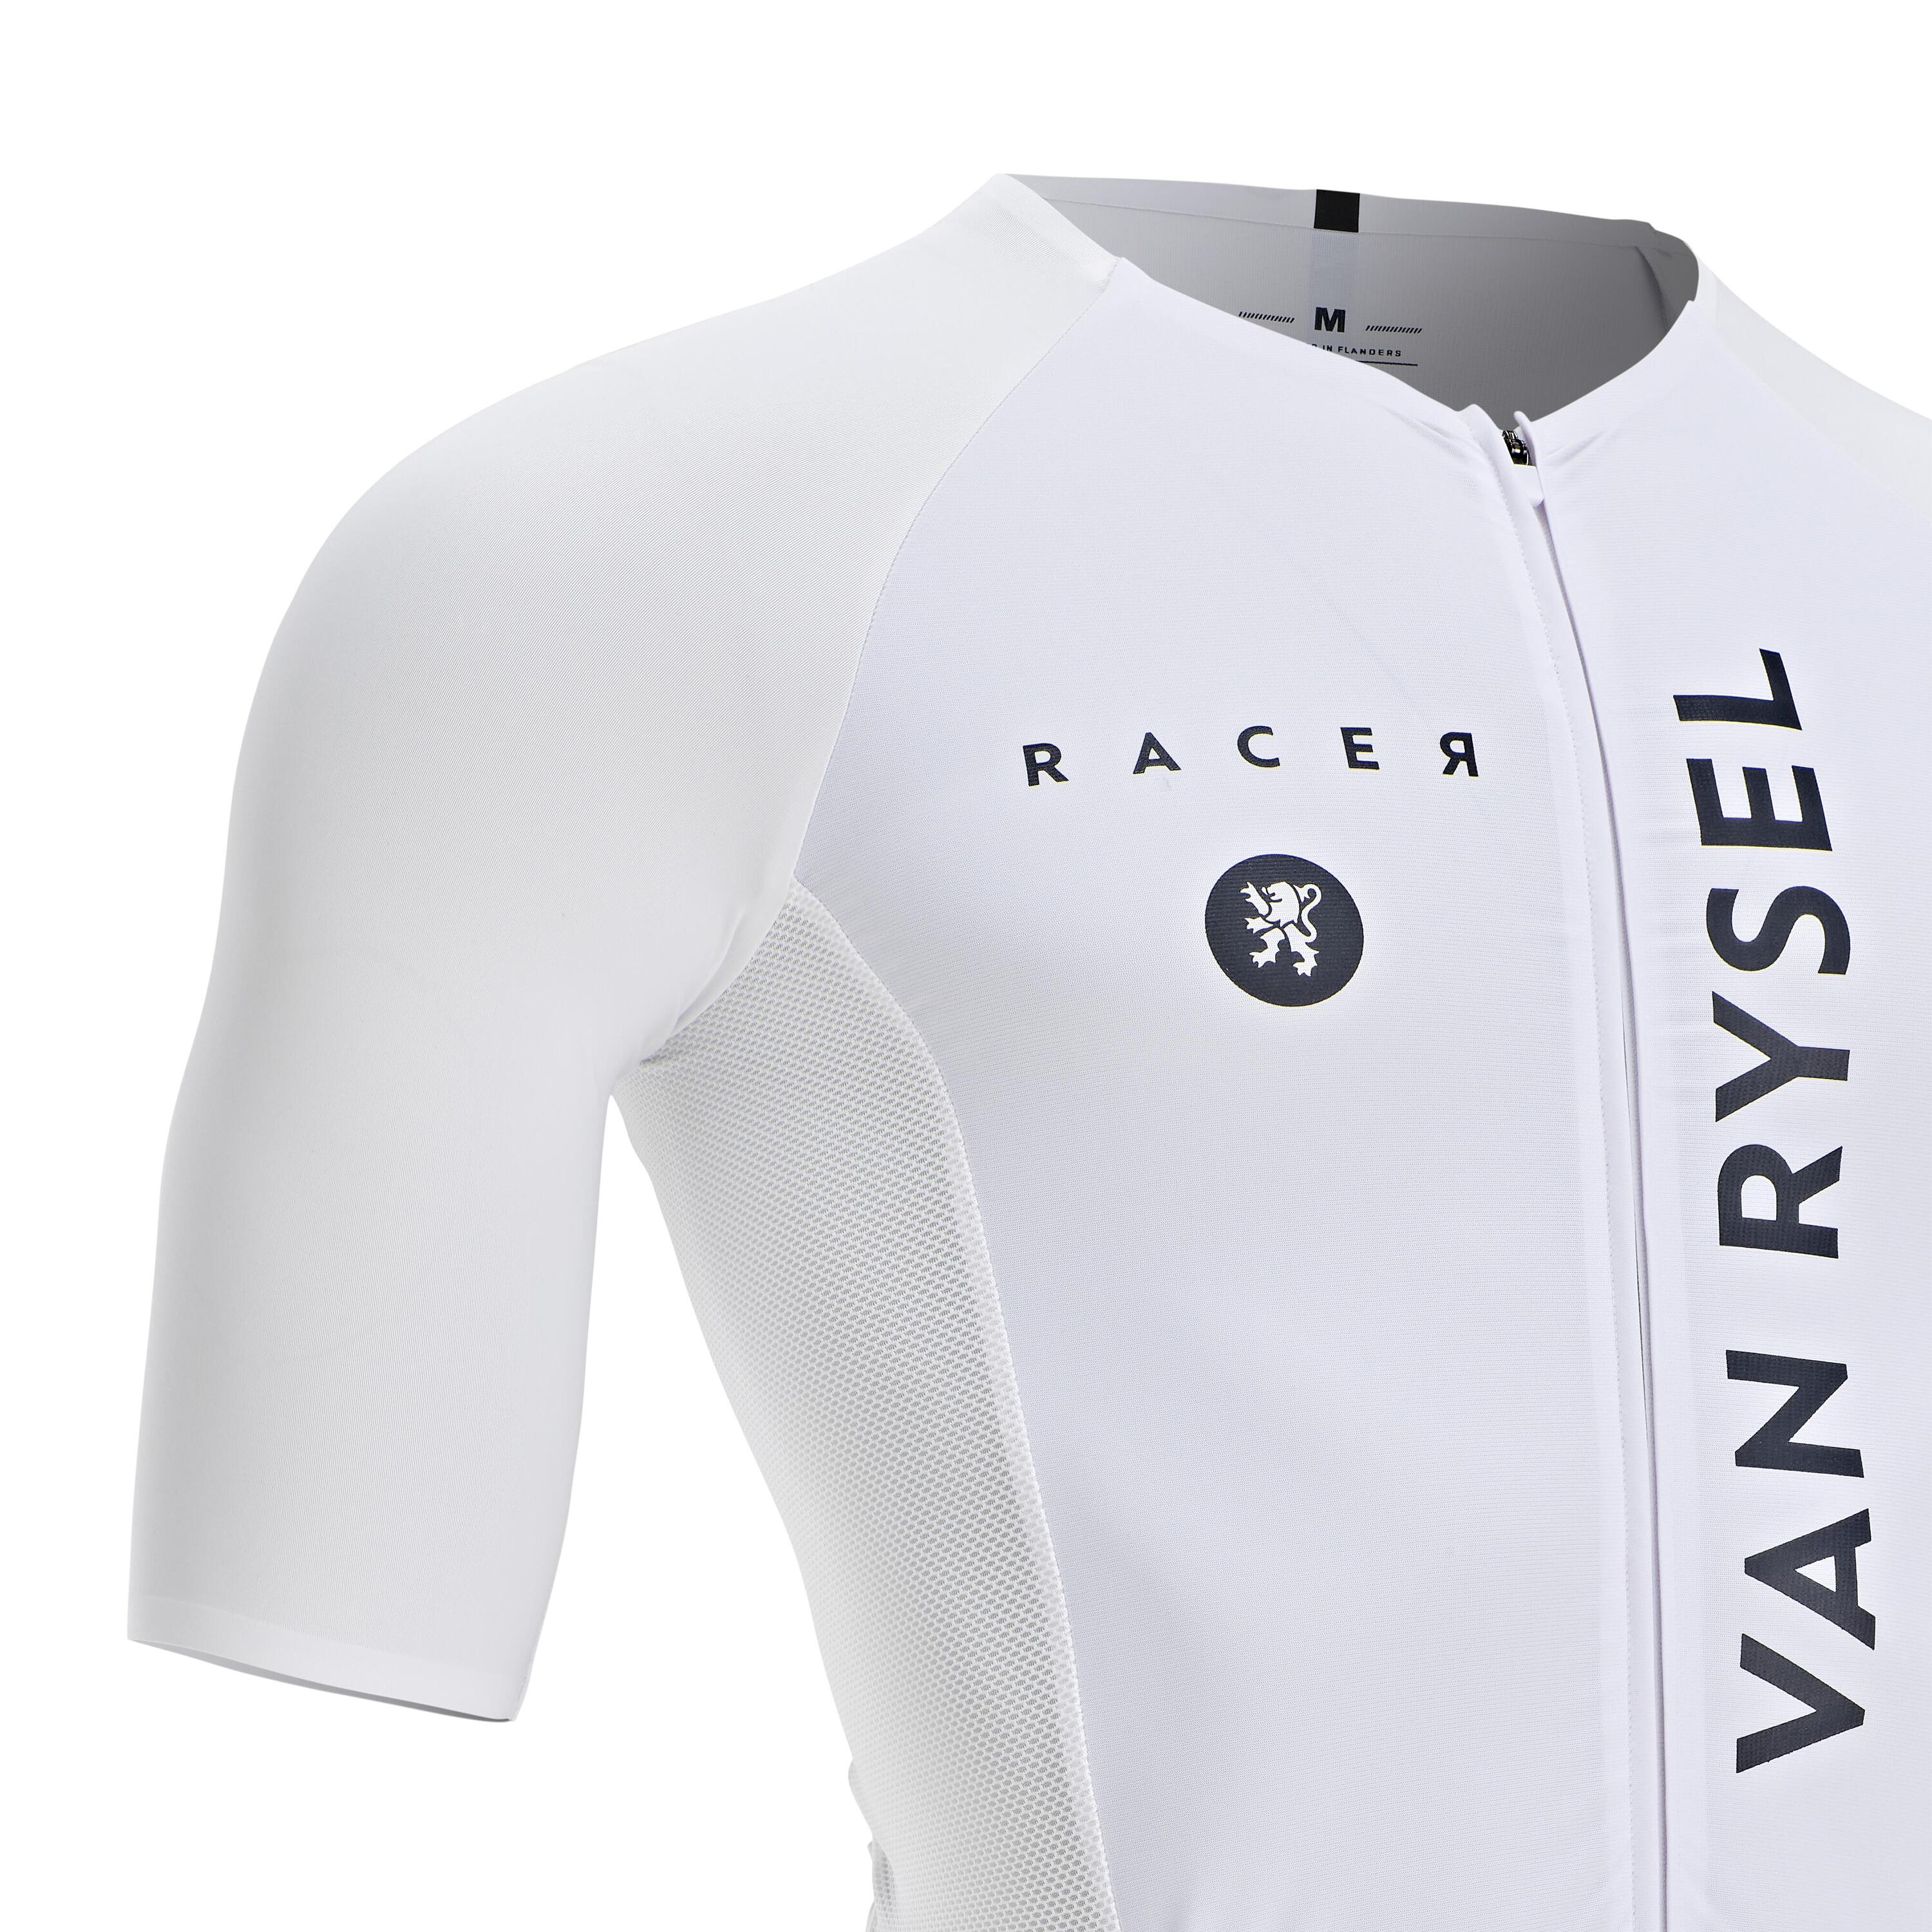 Road Cycling Aerosuit Racer Team - White Team 6/7